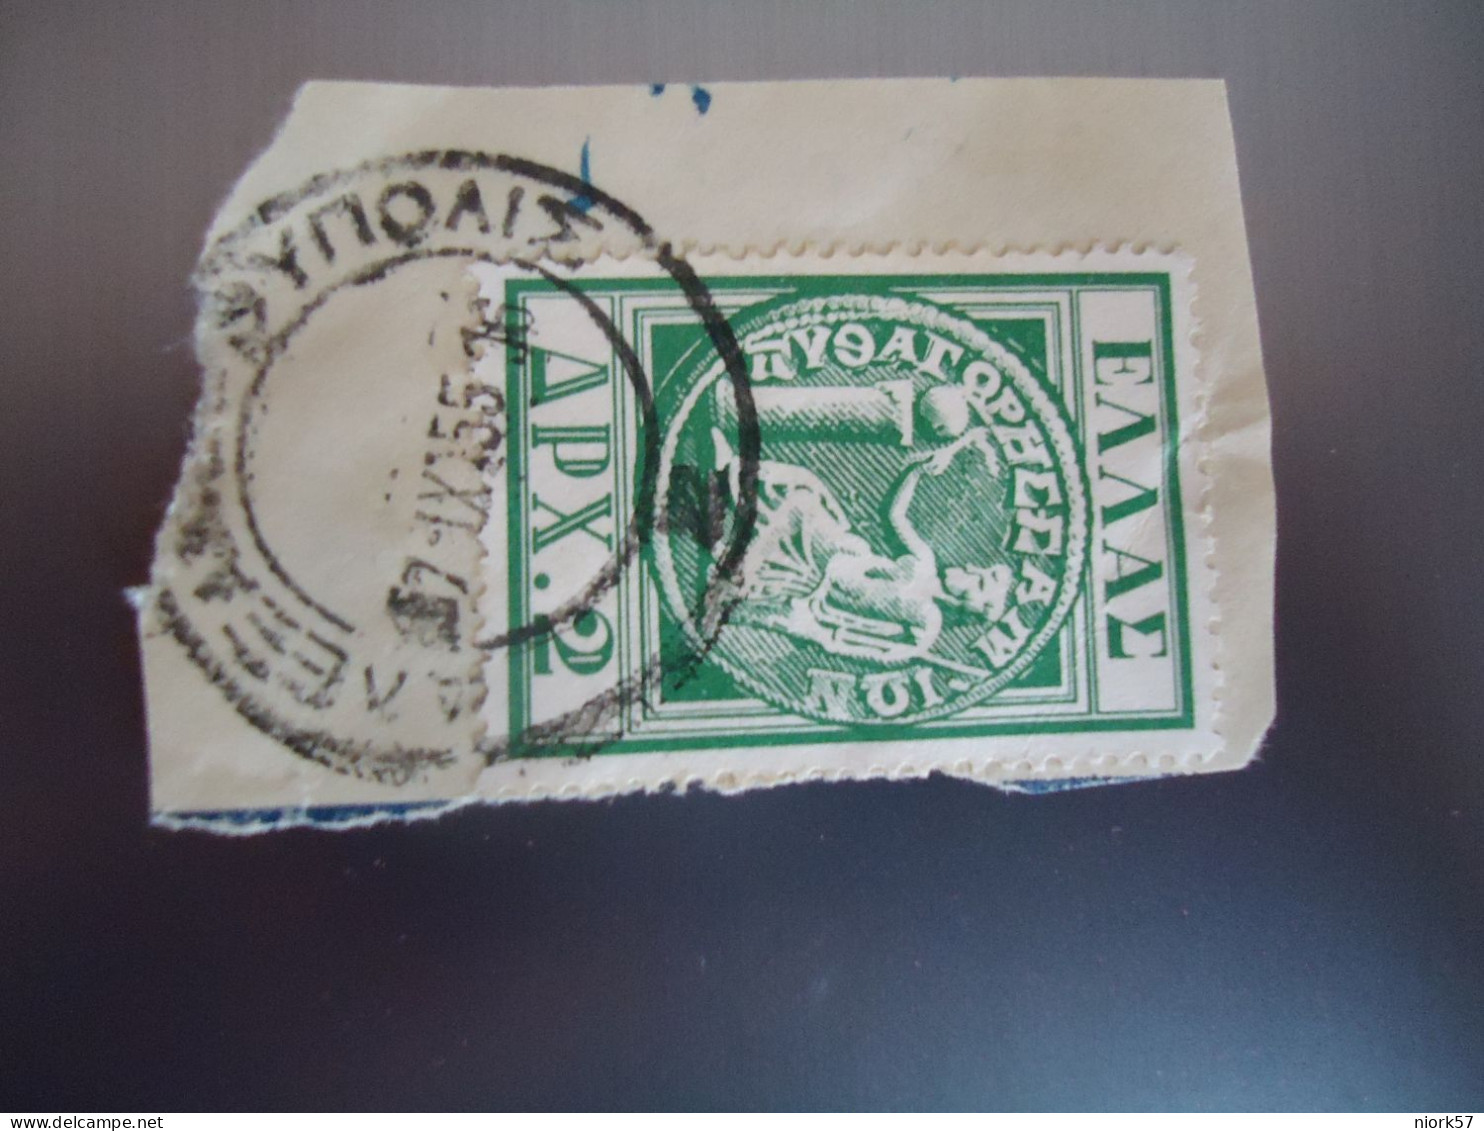 GREECE   USED STAMPS  ΠΥΘΑΓΟΡΑΣ  POSTMARK  ΑΛΕΞΑΝΔΡΟΥΠΟΛΙΣ  1955 - Used Stamps